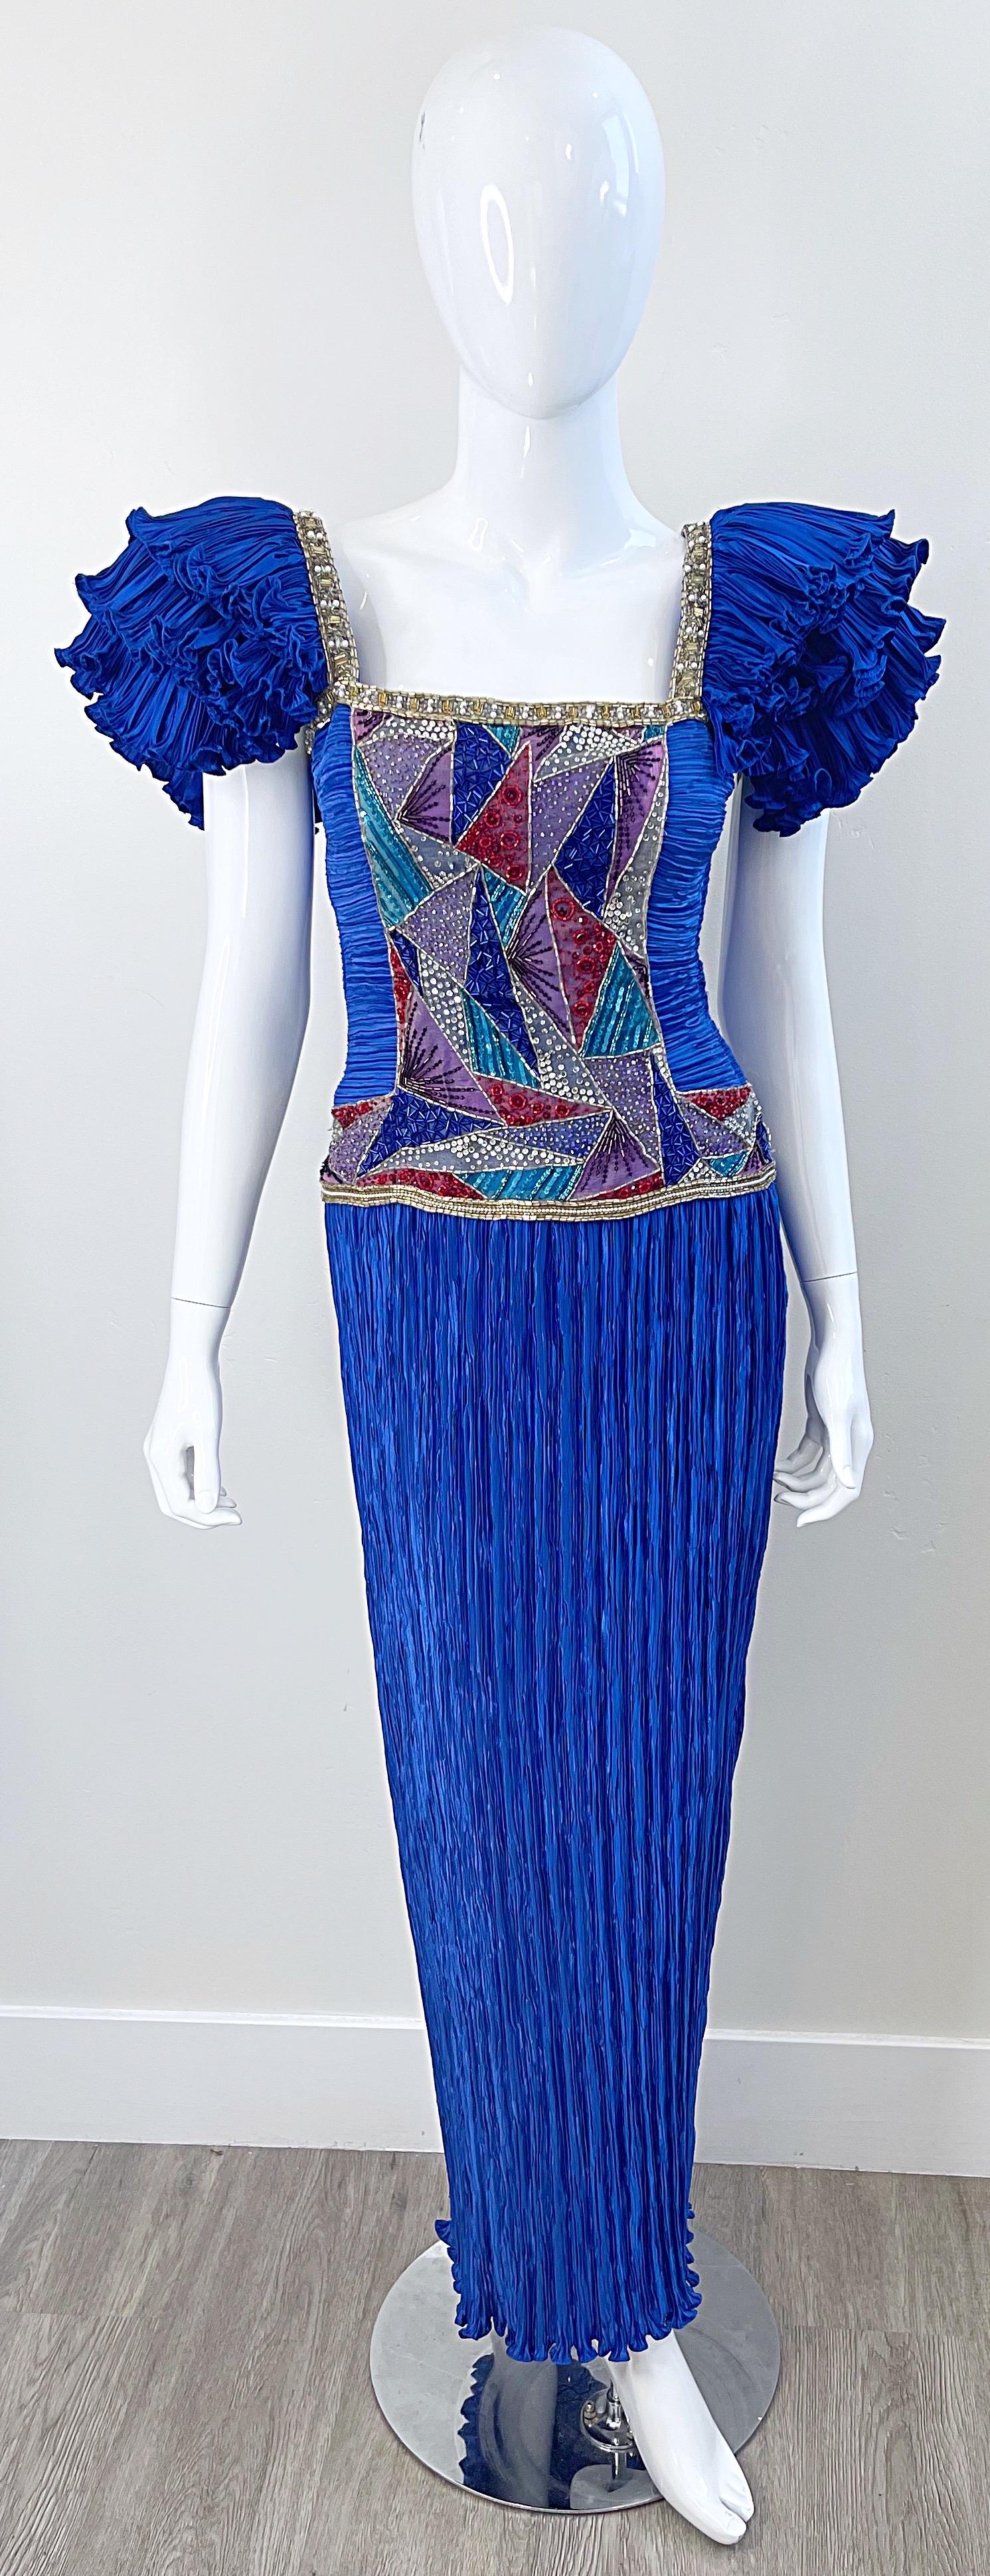 Gorgeous 1980s MARY MCFADDEN for NEIMAN MARCUS royal blue fortuny pleated evening gown ! Features Avant Garde ruffle sleeves. Thousands of hand-sewn sequins, beads and pearls encrusted throughout the front and back bodice. Boned interior holds